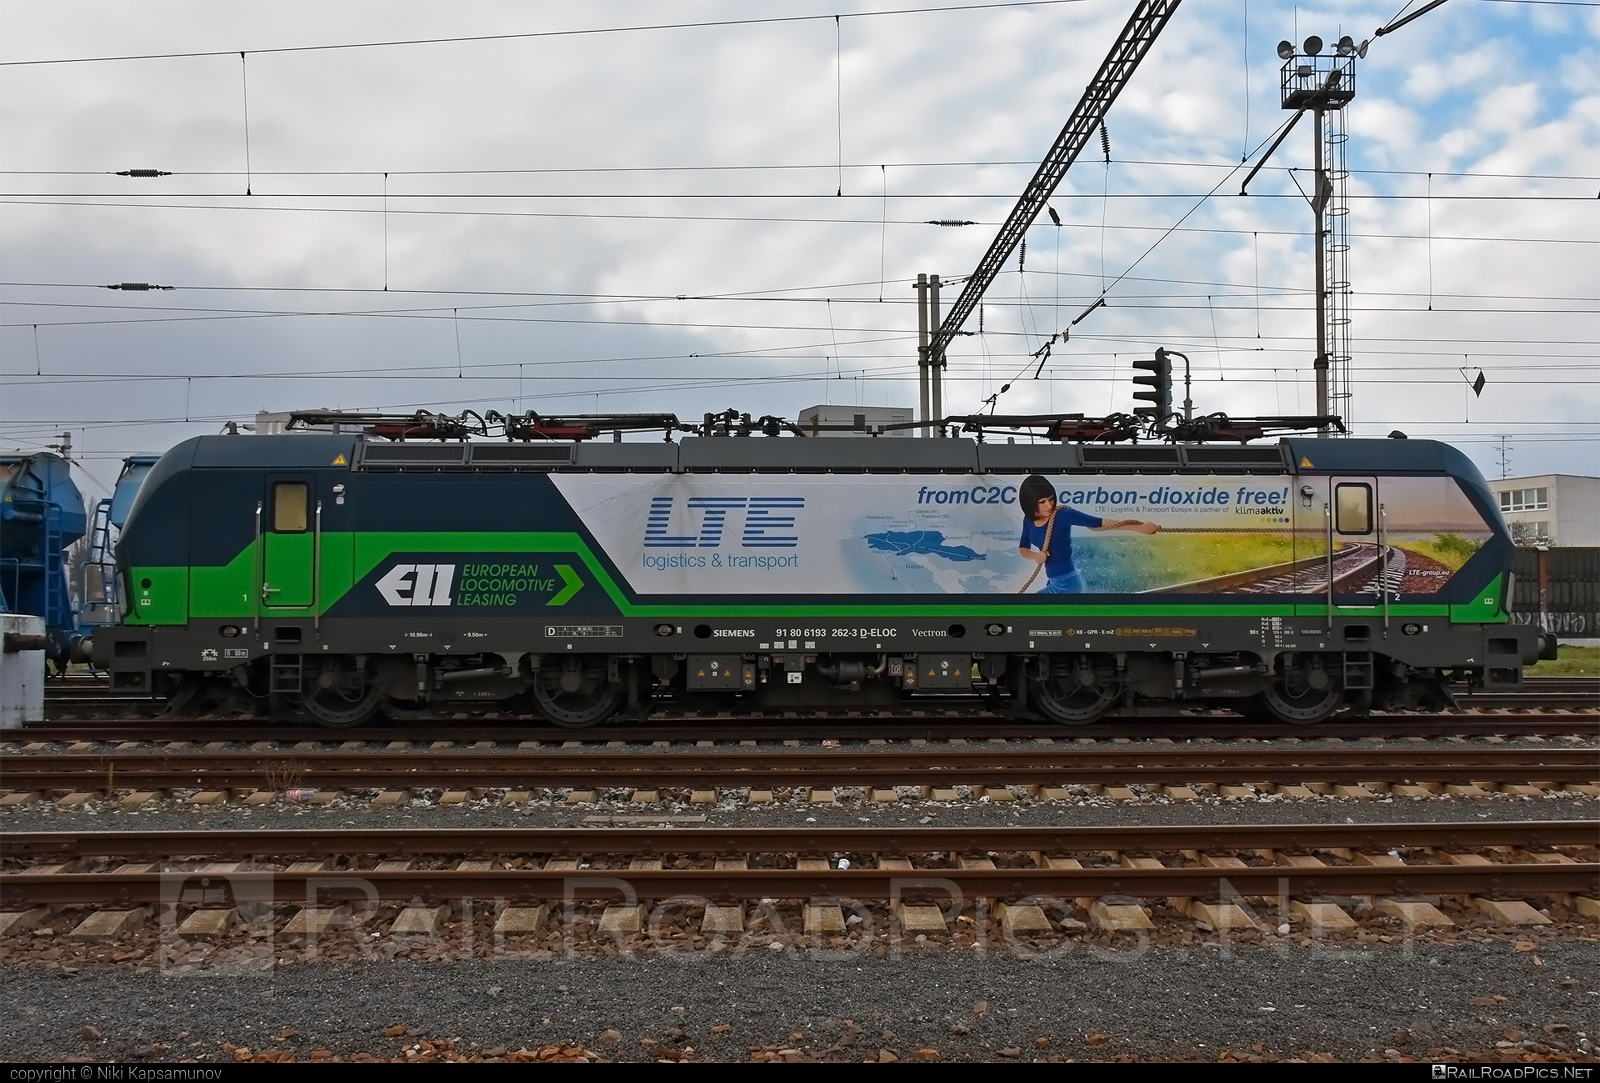 Siemens Vectron MS - 193 262 operated by LTE Logistik und Transport GmbH #ell #ellgermany #eloc #europeanlocomotiveleasing #lte #ltelogistikundtransport #ltelogistikundtransportgmbh #siemens #siemensVectron #siemensVectronMS #vectron #vectronMS